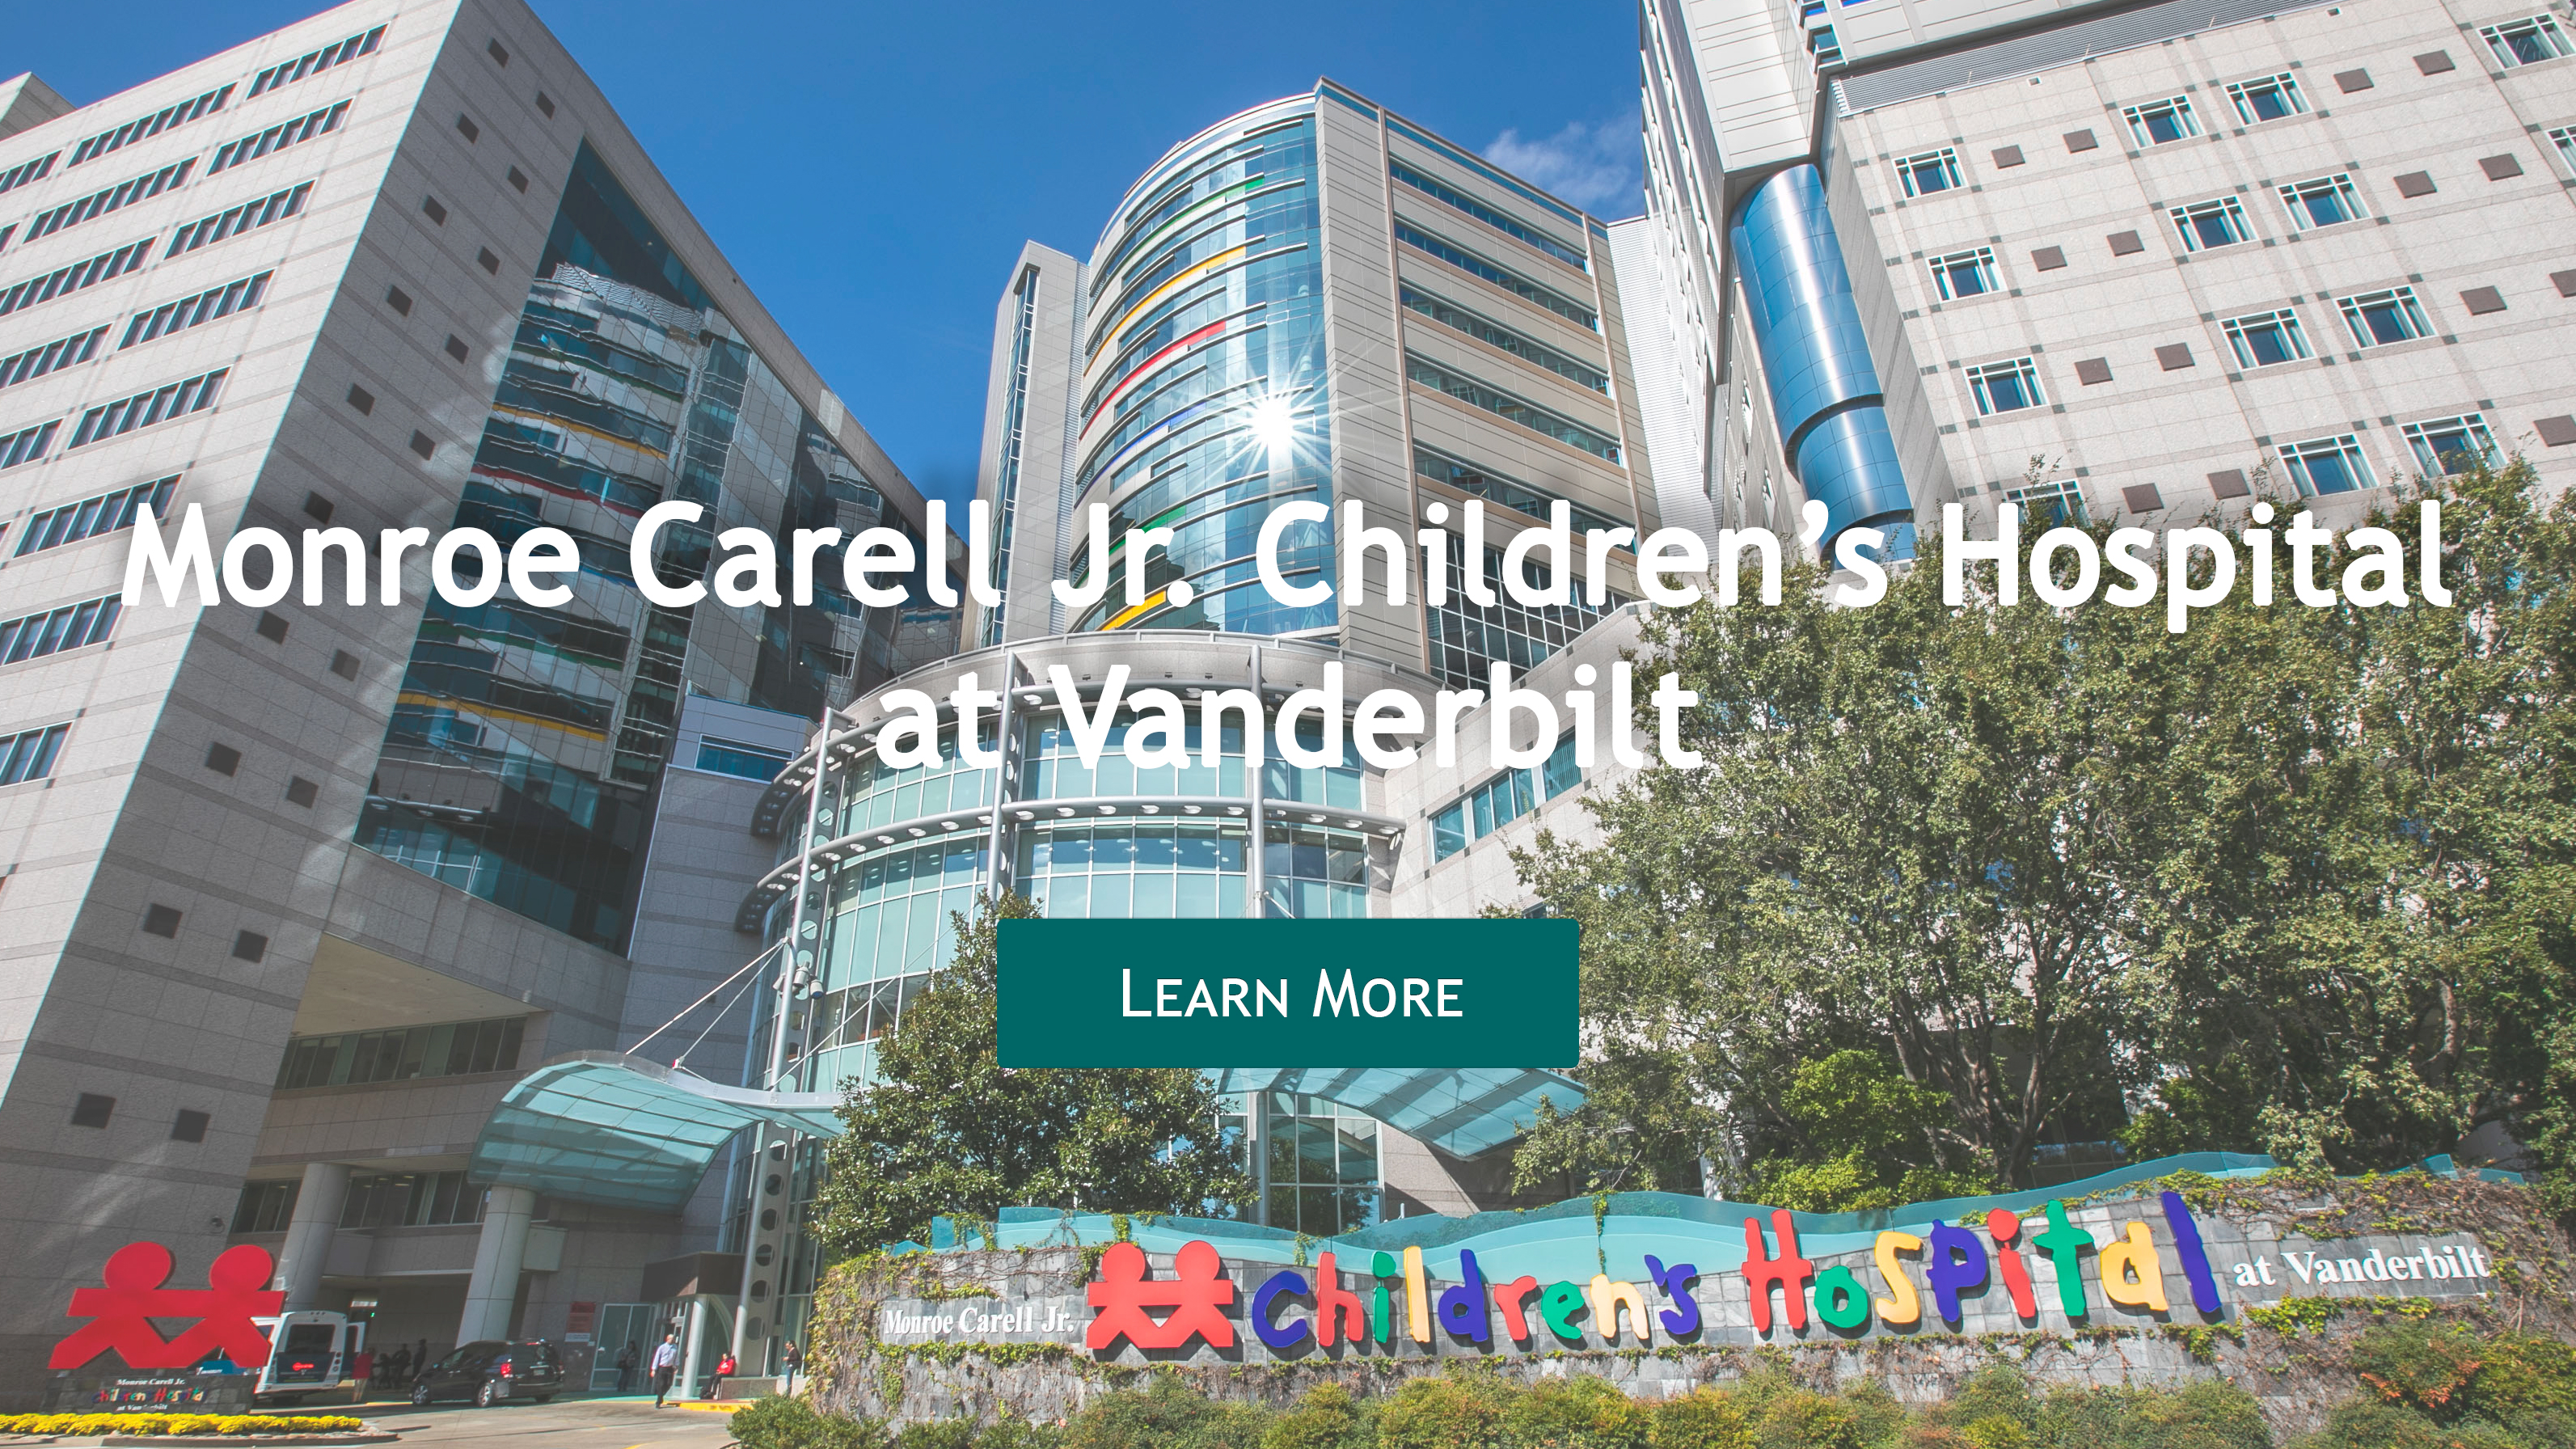 Welcome to Monroe Carell Jr. Children's Hospital at Vanderbilt. Click here to learn more.